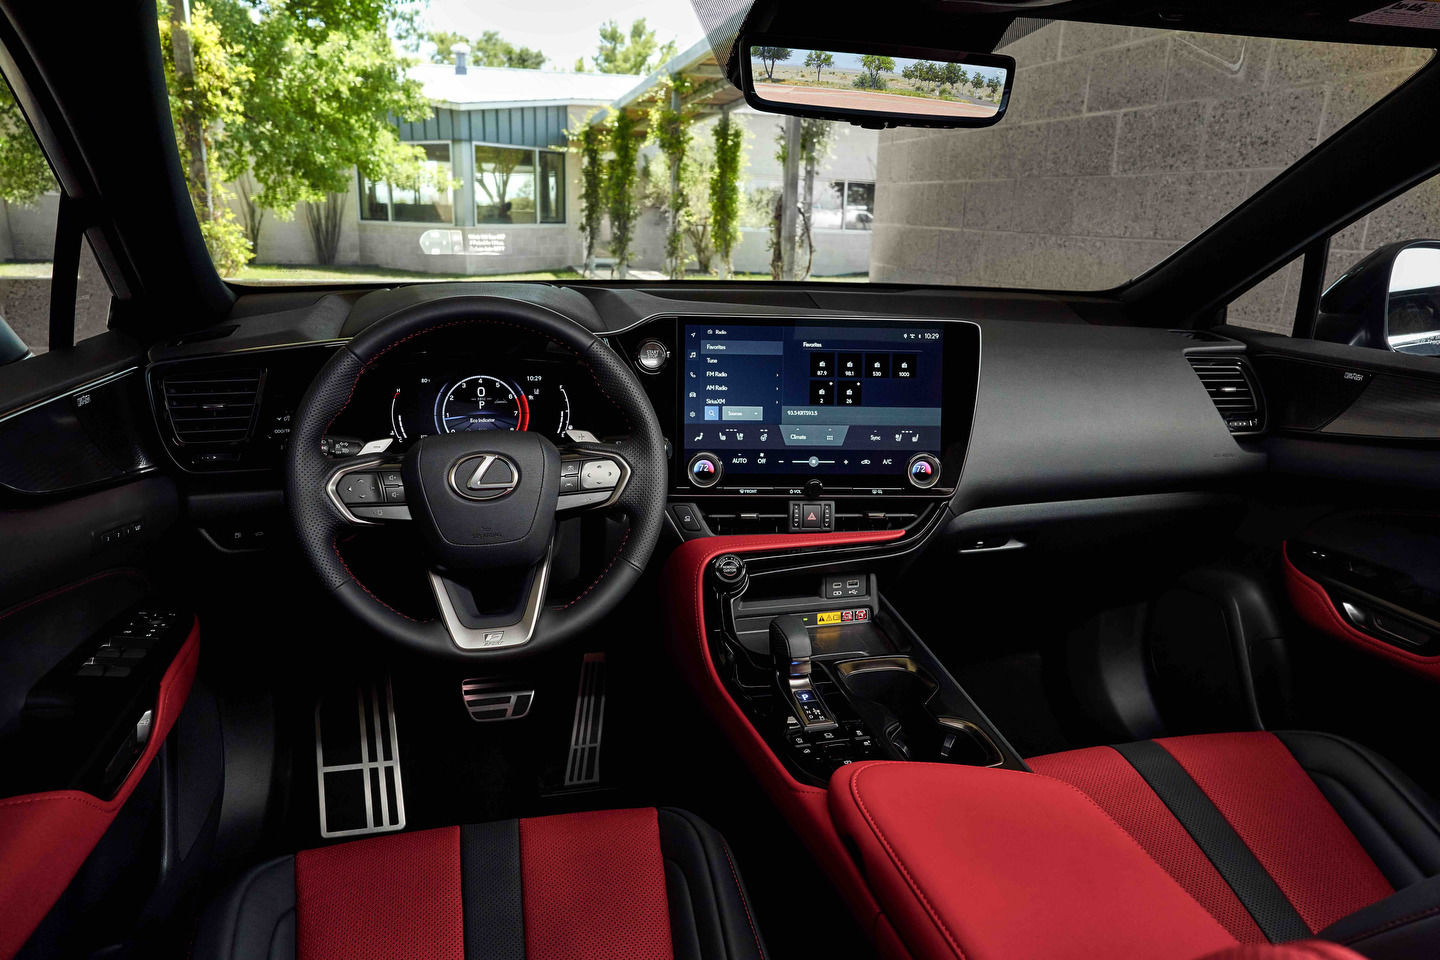 Lexus announces Safety Connect and Service Connect extensions for up to 10 years